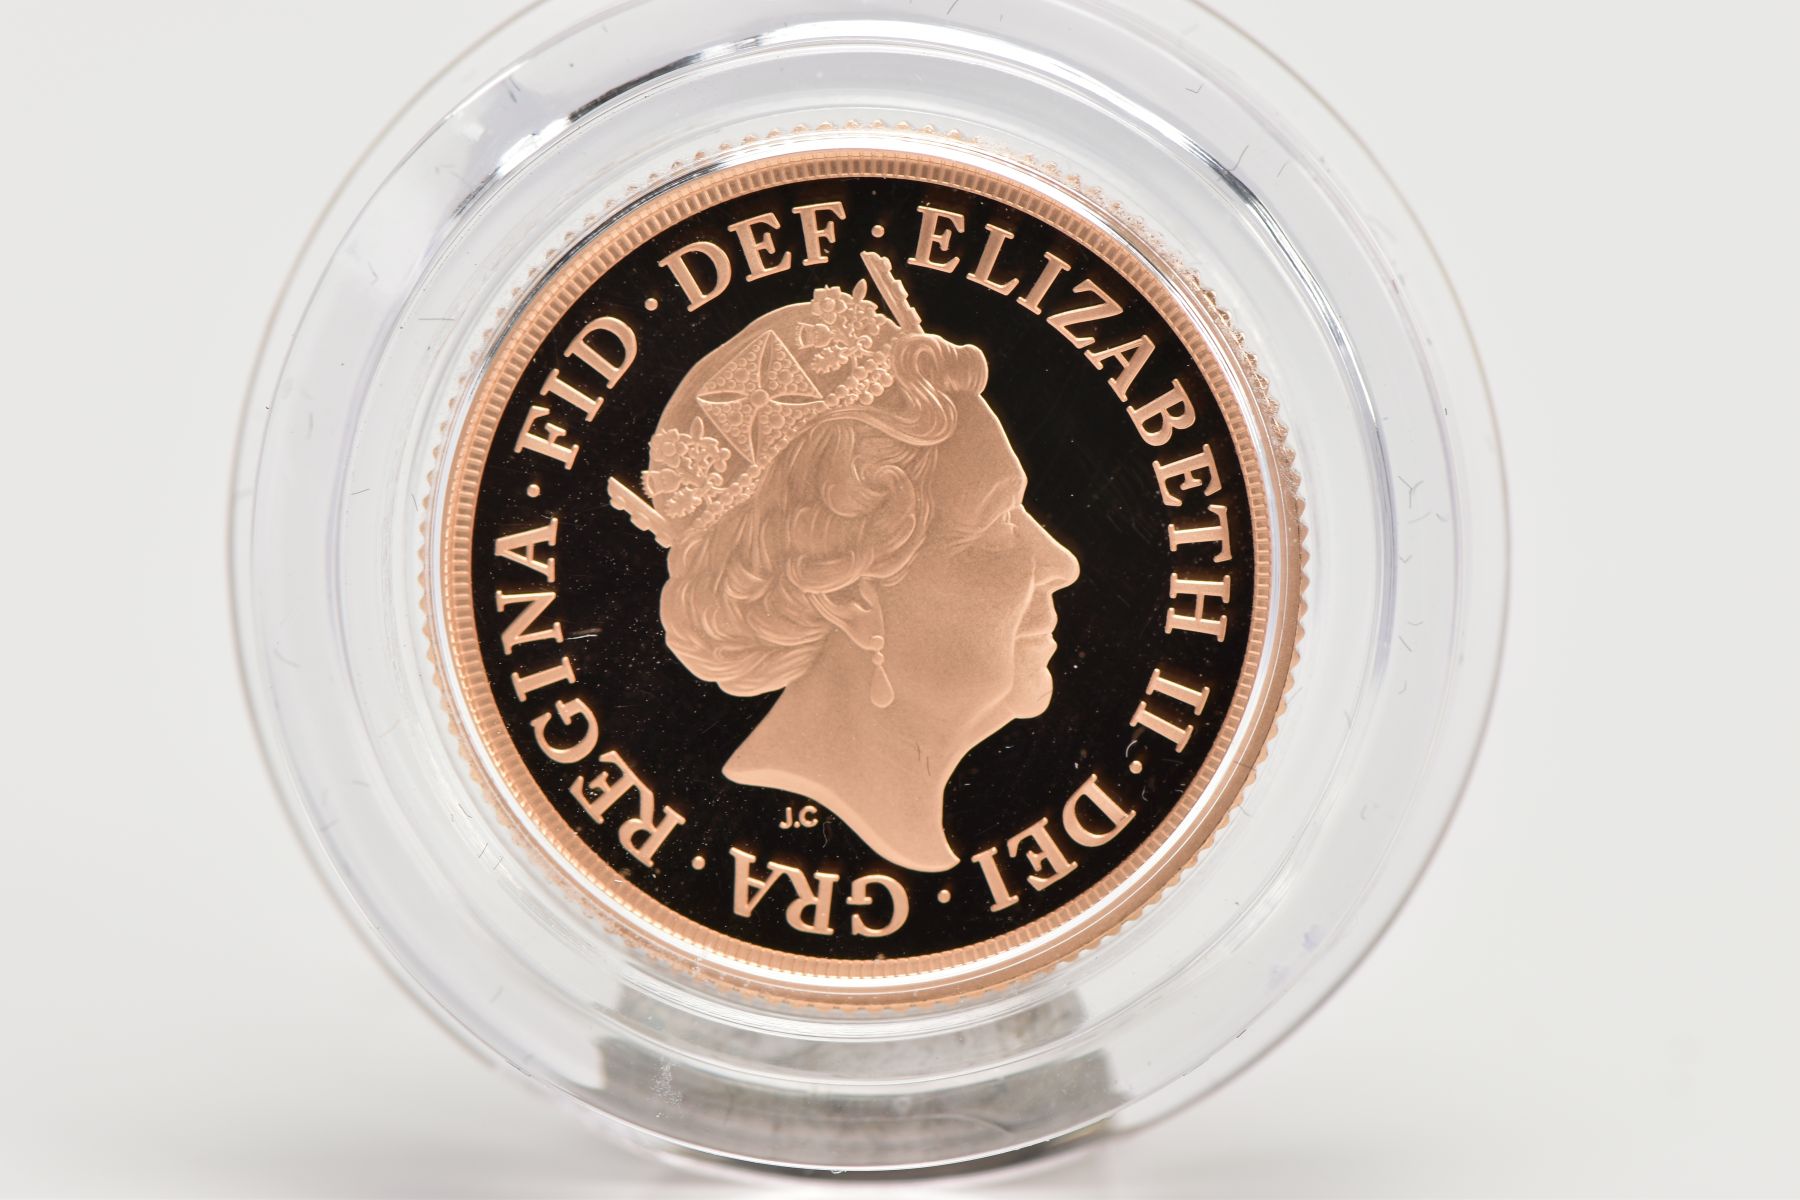 A ROYAL MINT BOXED WITH A C.O.A. 2019 GOLD PROOF SOVEREIGN including a sovereign booklet - Image 3 of 3